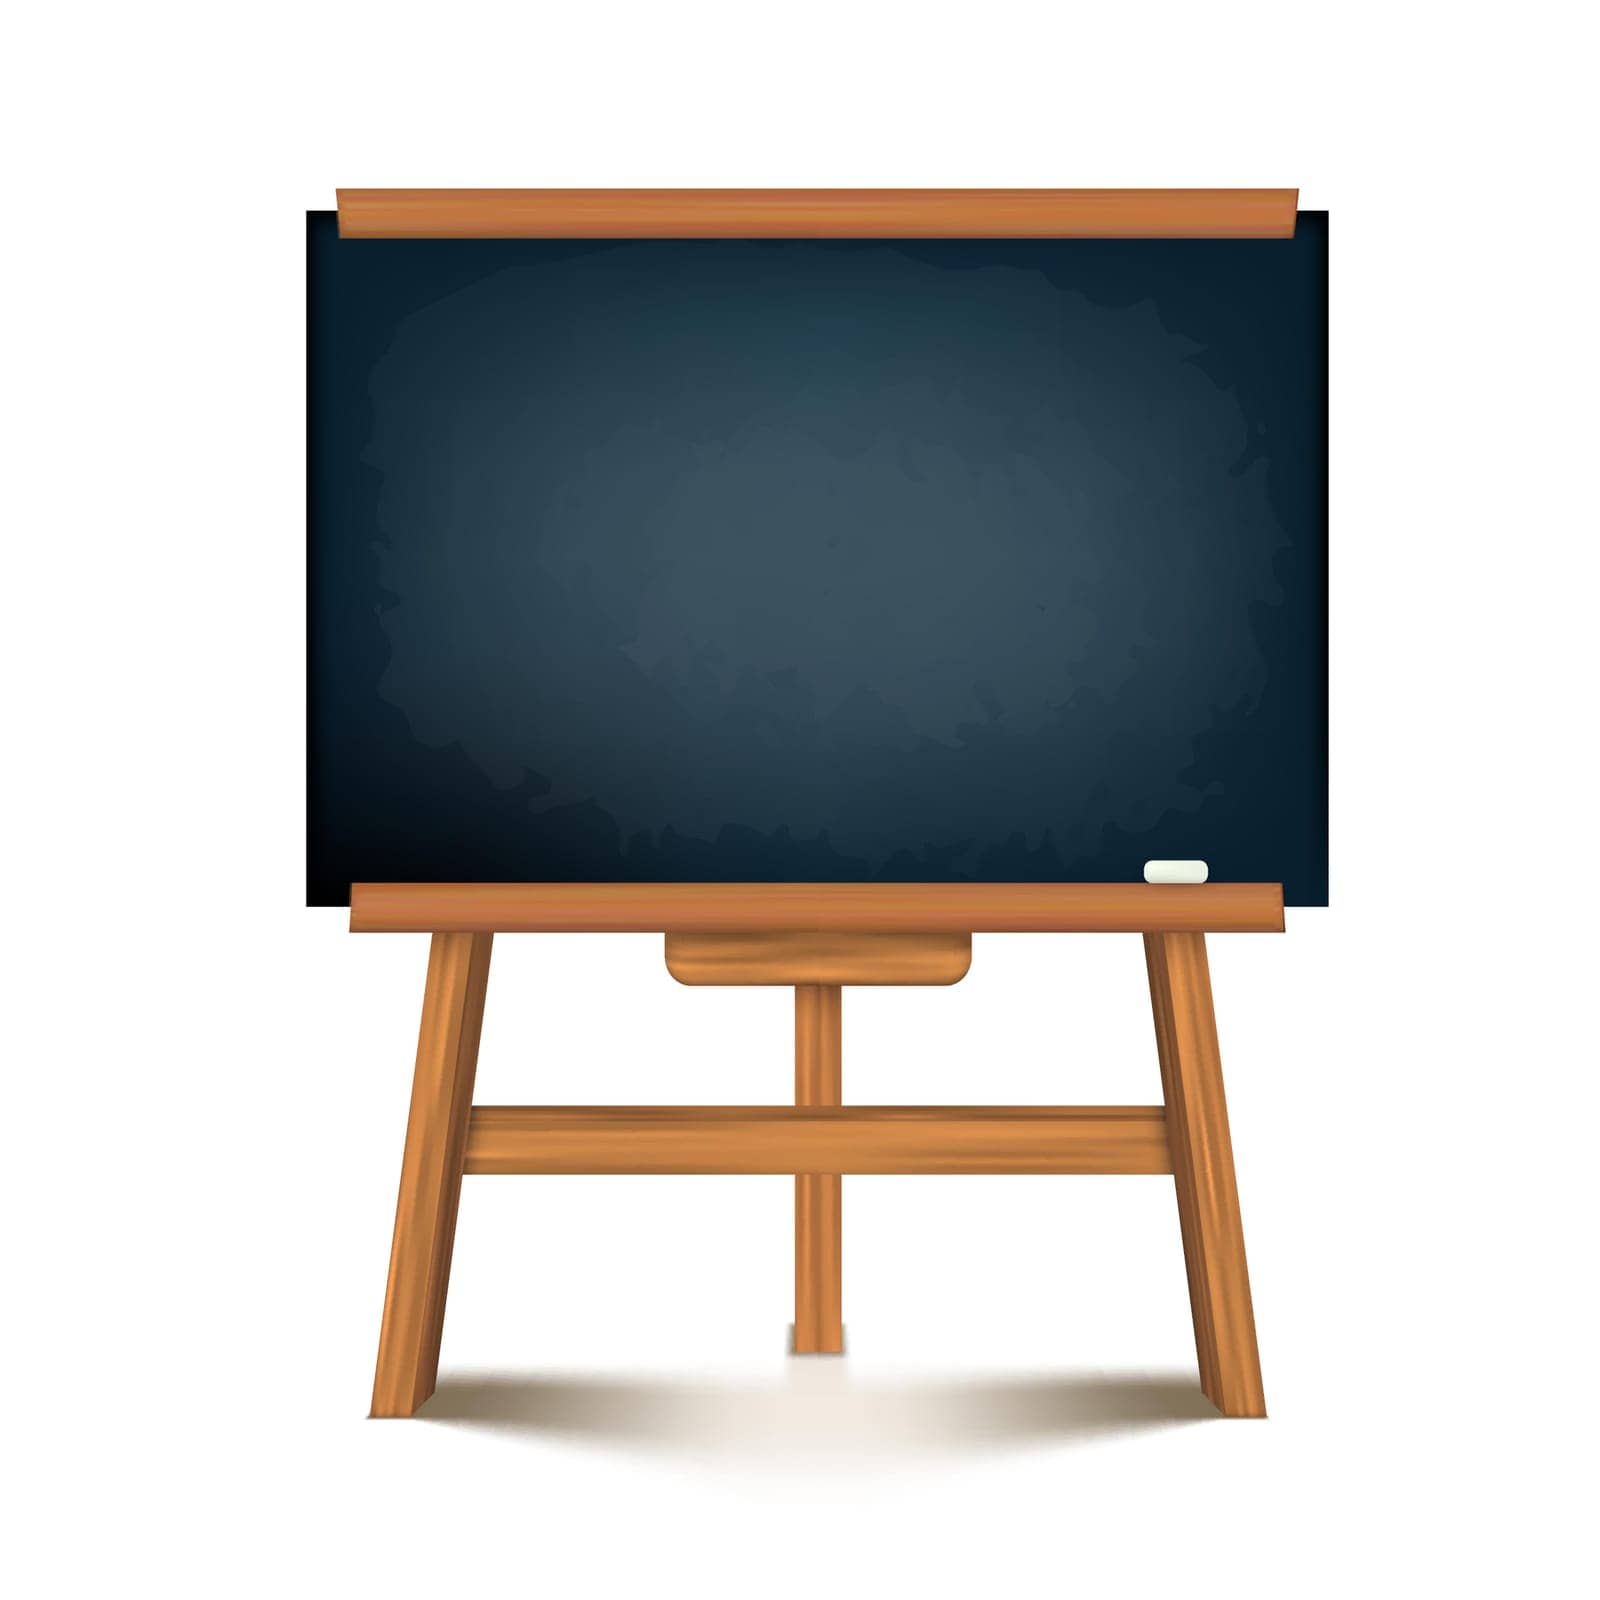 Black Board On Wall And On Stand by VectorThings